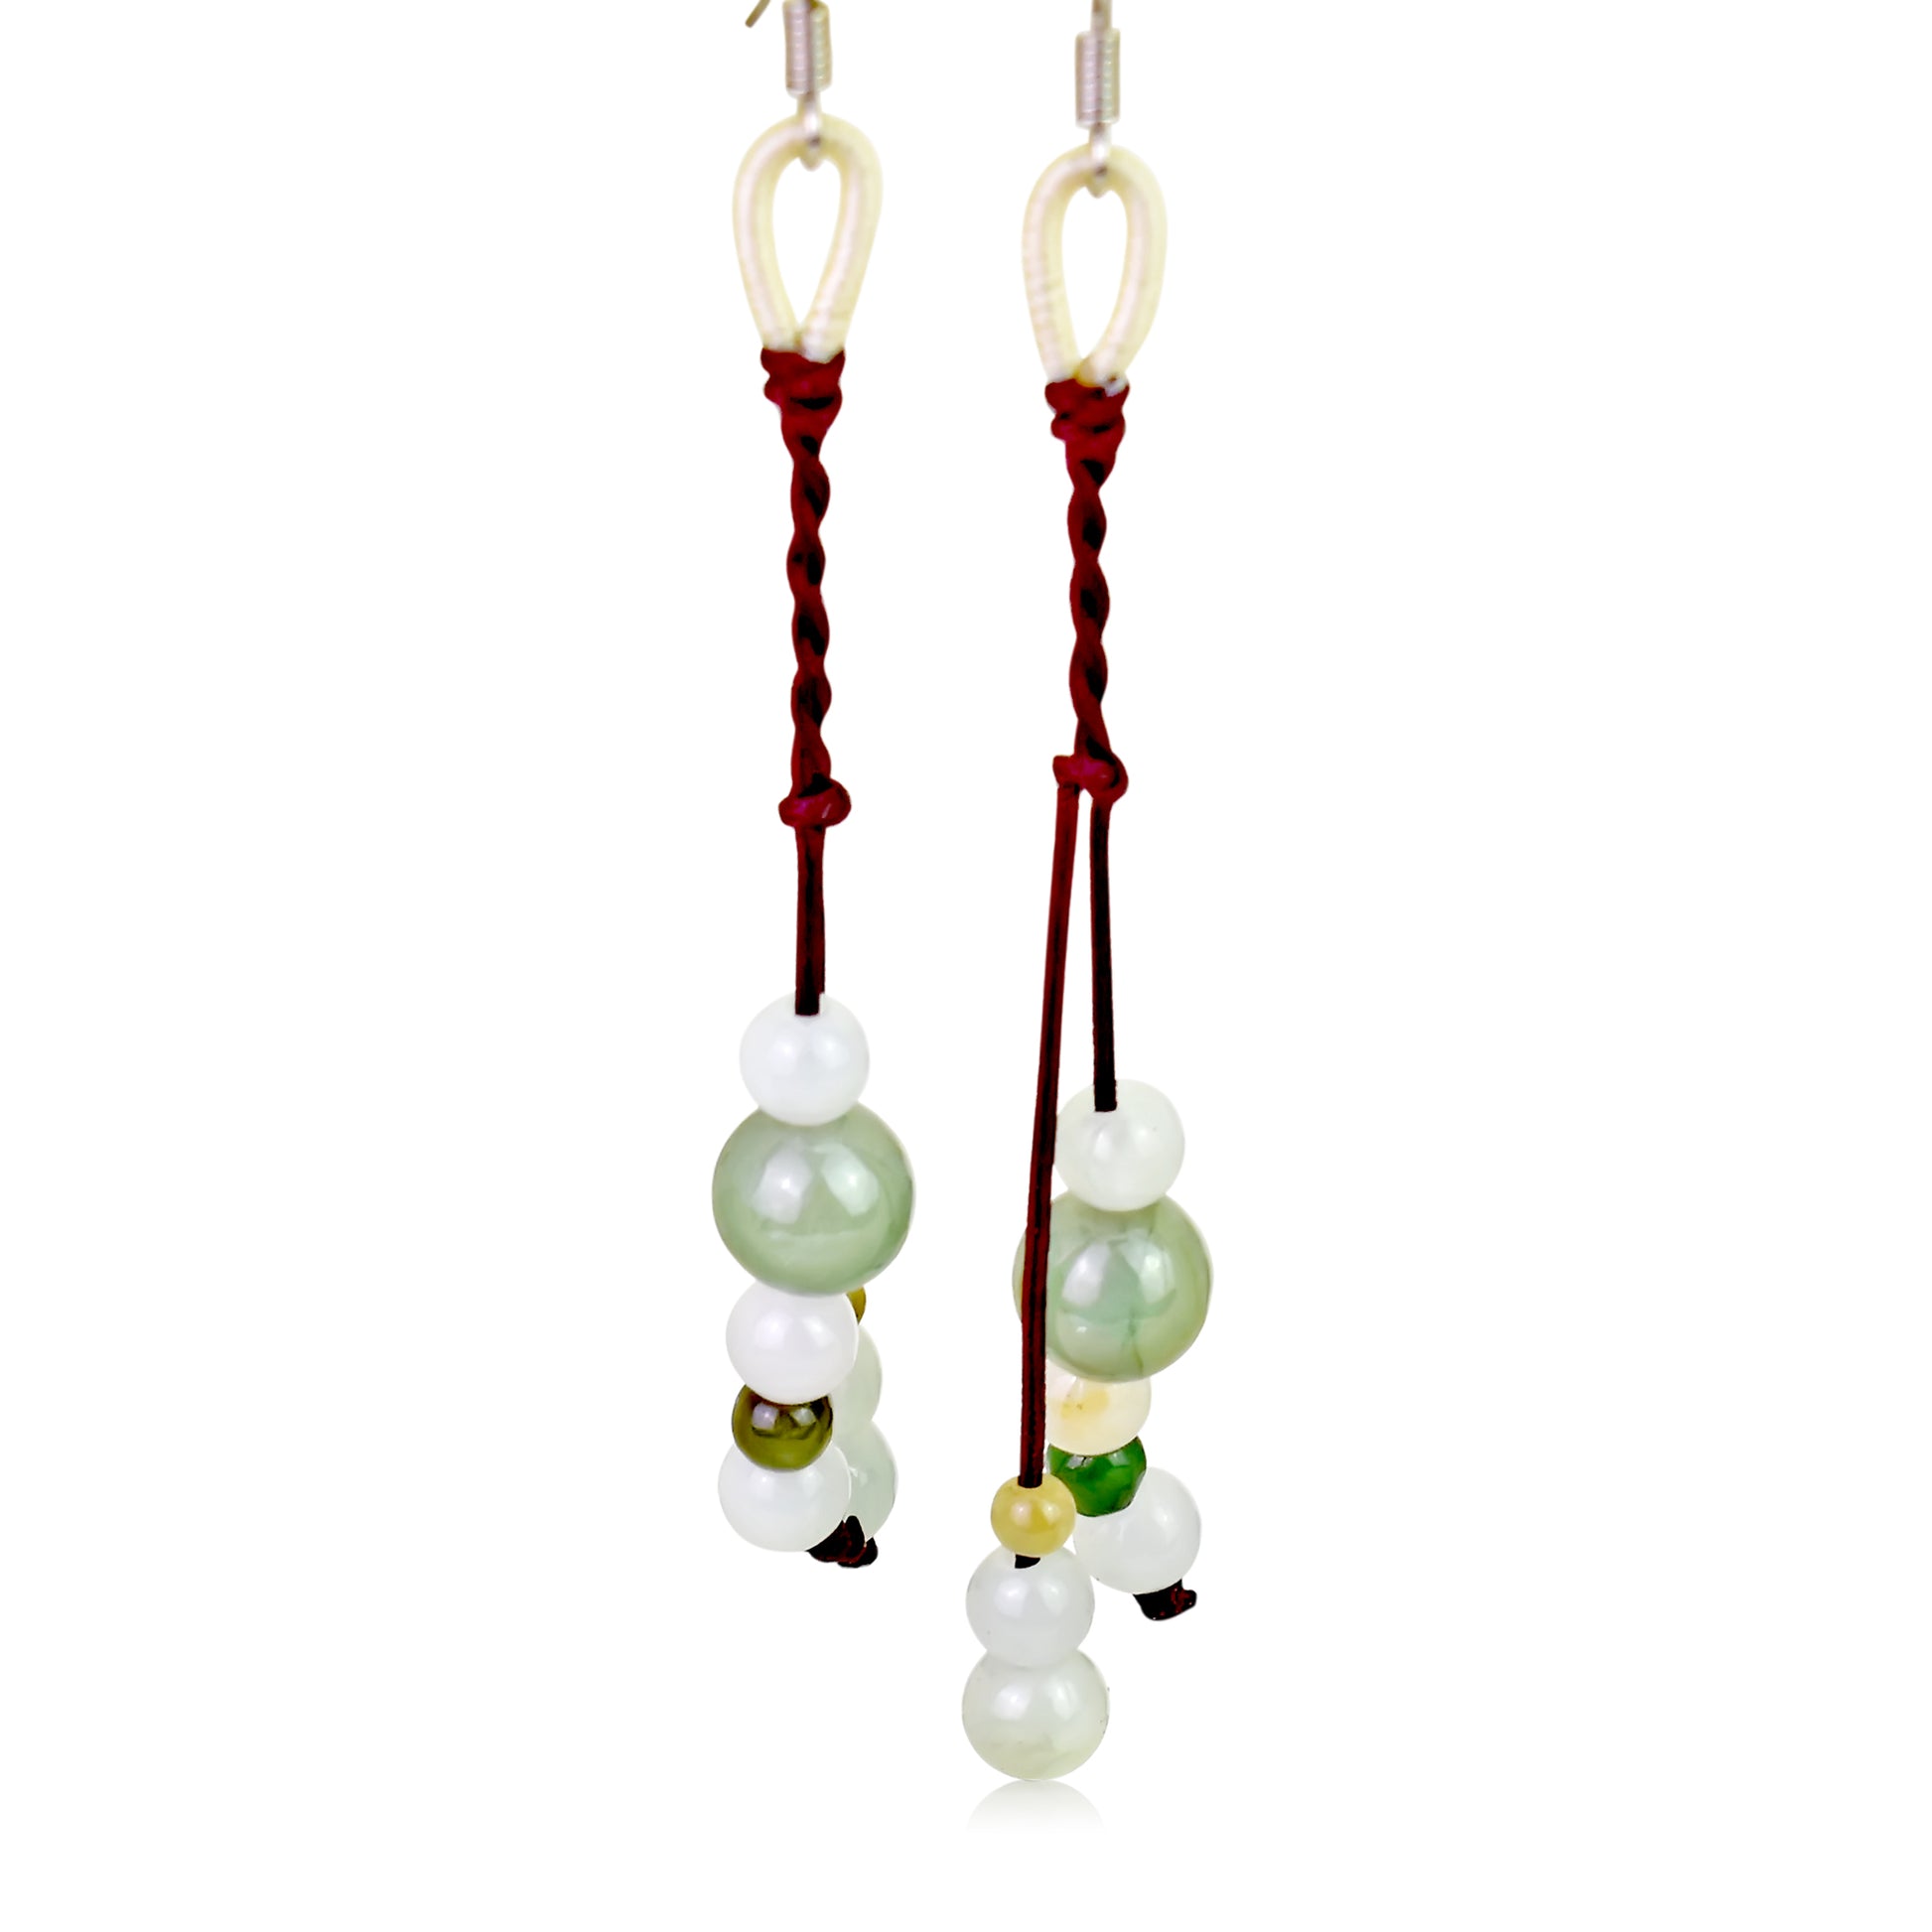 Add a Touch of Elegance to Your Look with Handmade Jade Beads Earrings made with Brown Cord